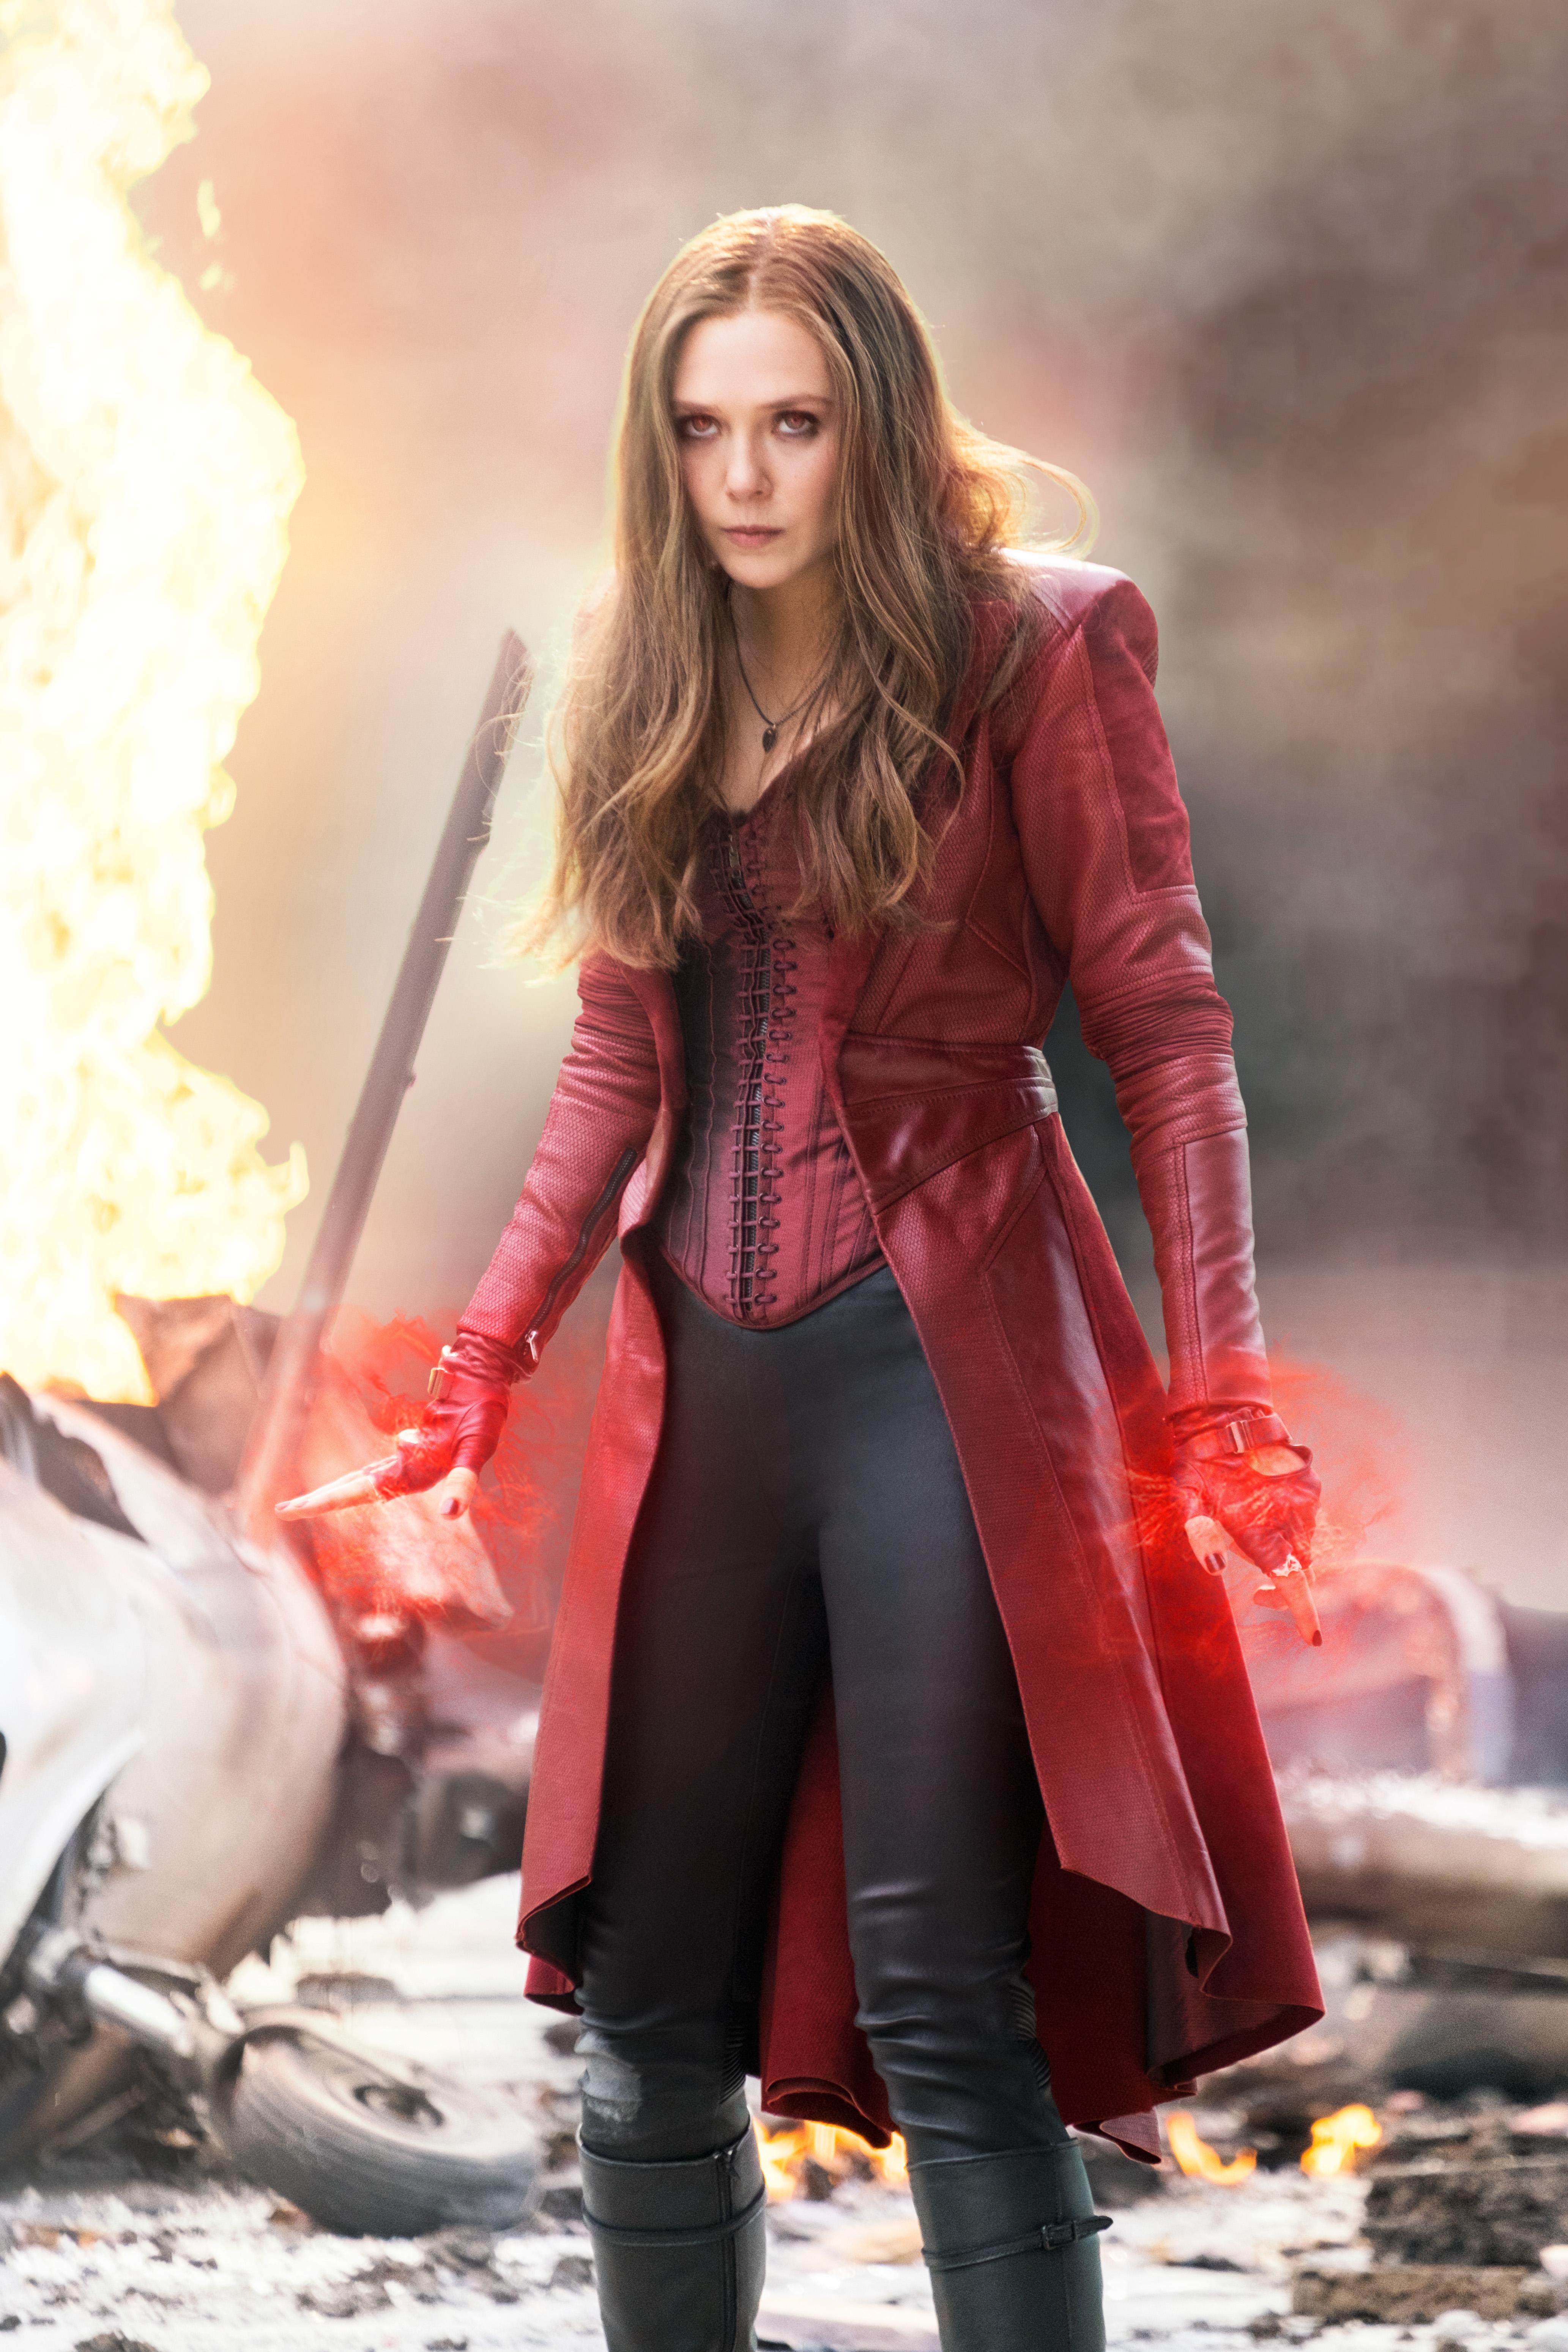 Elizabeth Olsen Wishes Her Avengers Costume Was a Little Less